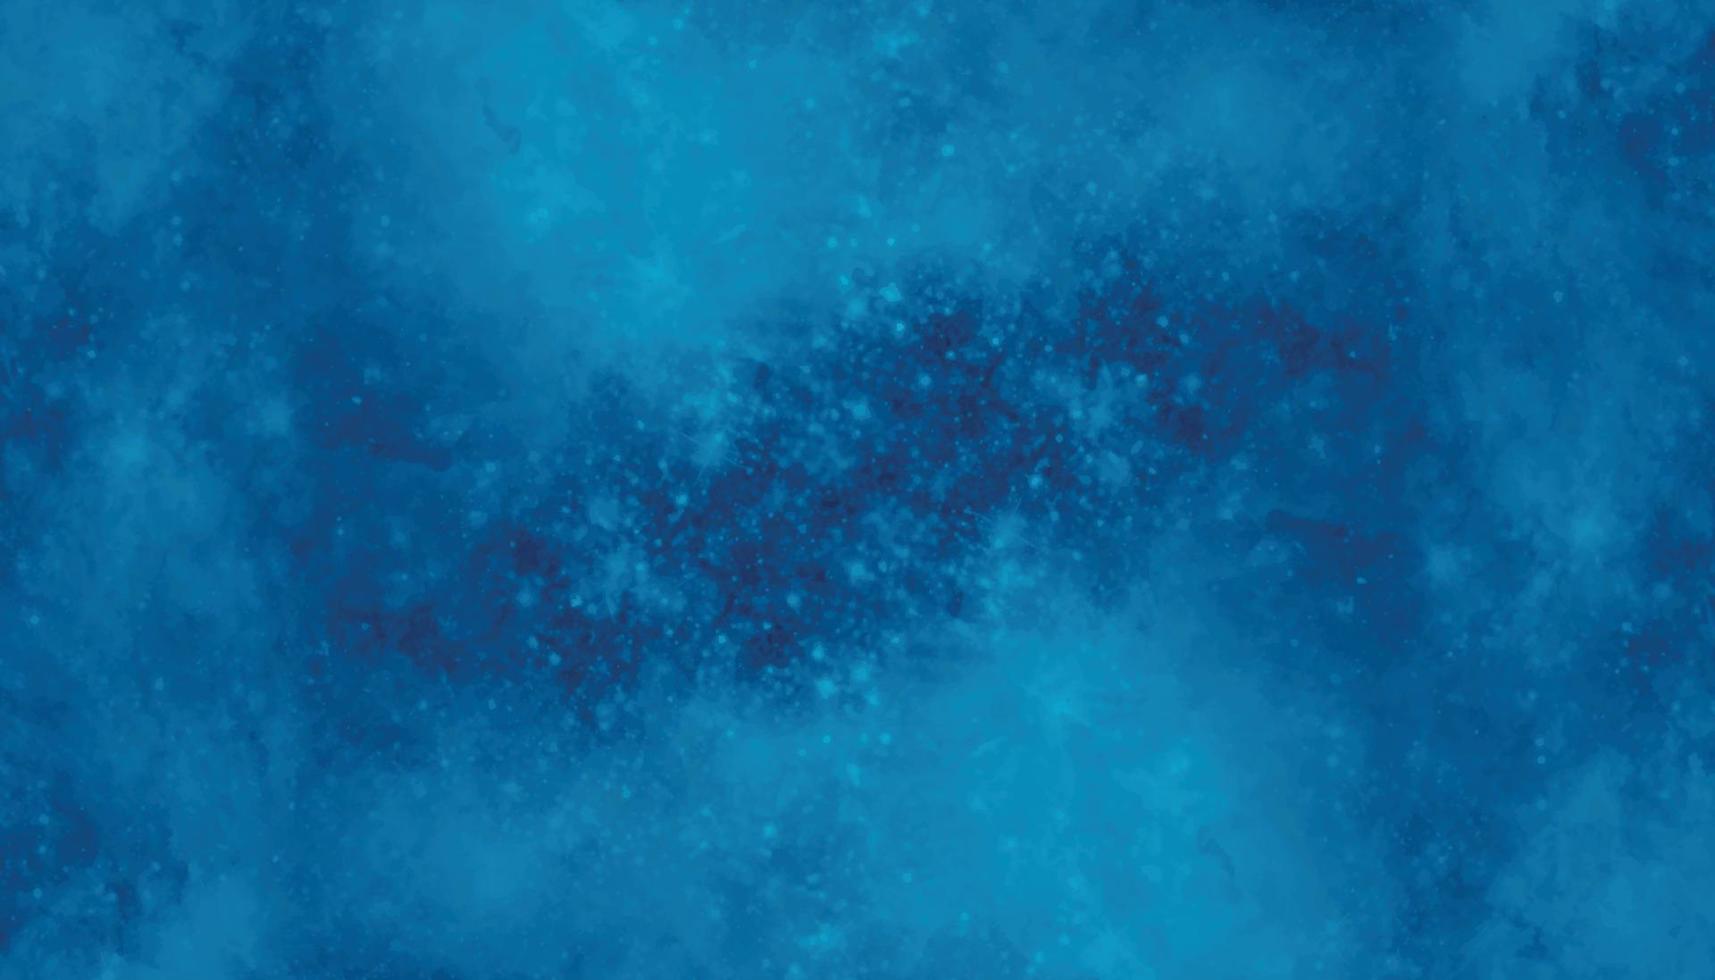 blue watercolor and paper texture. beautiful dark gradient hand drawn by brush grunge background. watercolor wash aqua painted texture close up, grungy design. blue nebula sparkle star universe vector